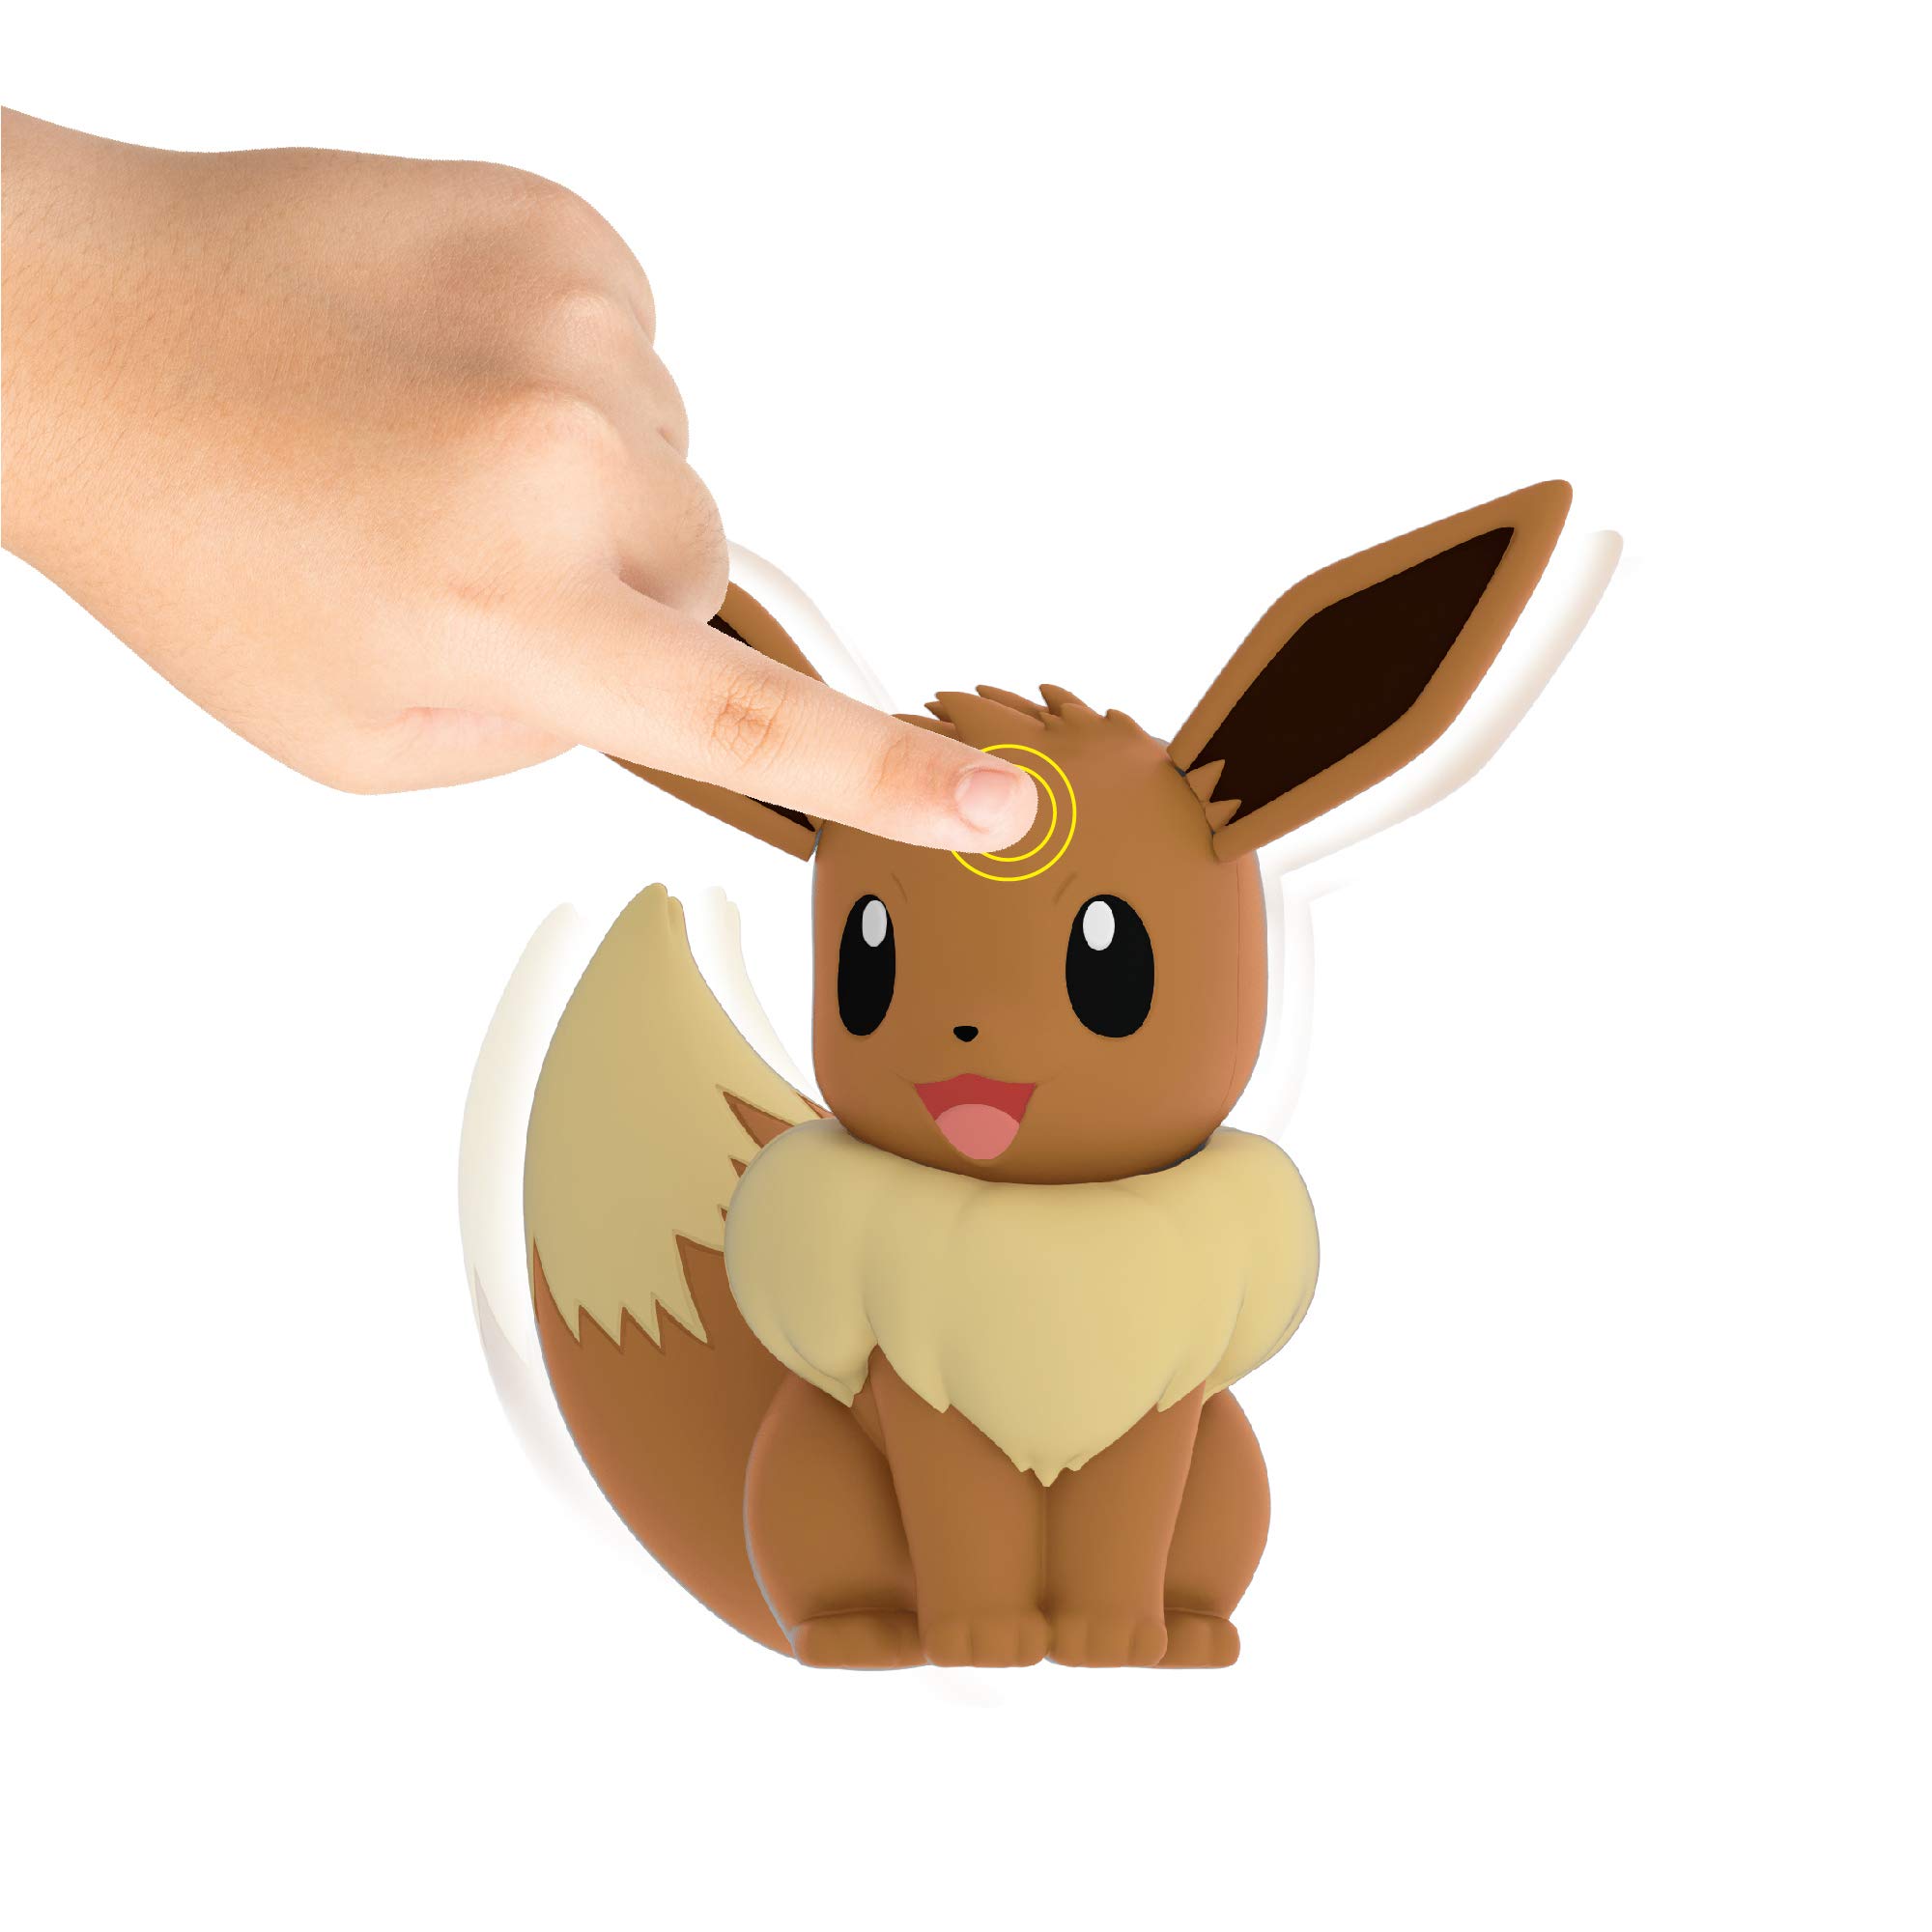 Pokemon Electronic & Interactive My Partner Eevee - Reacts to Touch & Sound, Over 50 Different Interactions with Movement and Sound - Dances, Moves & Speaks - Gotta Catch ‘Em All , Brown